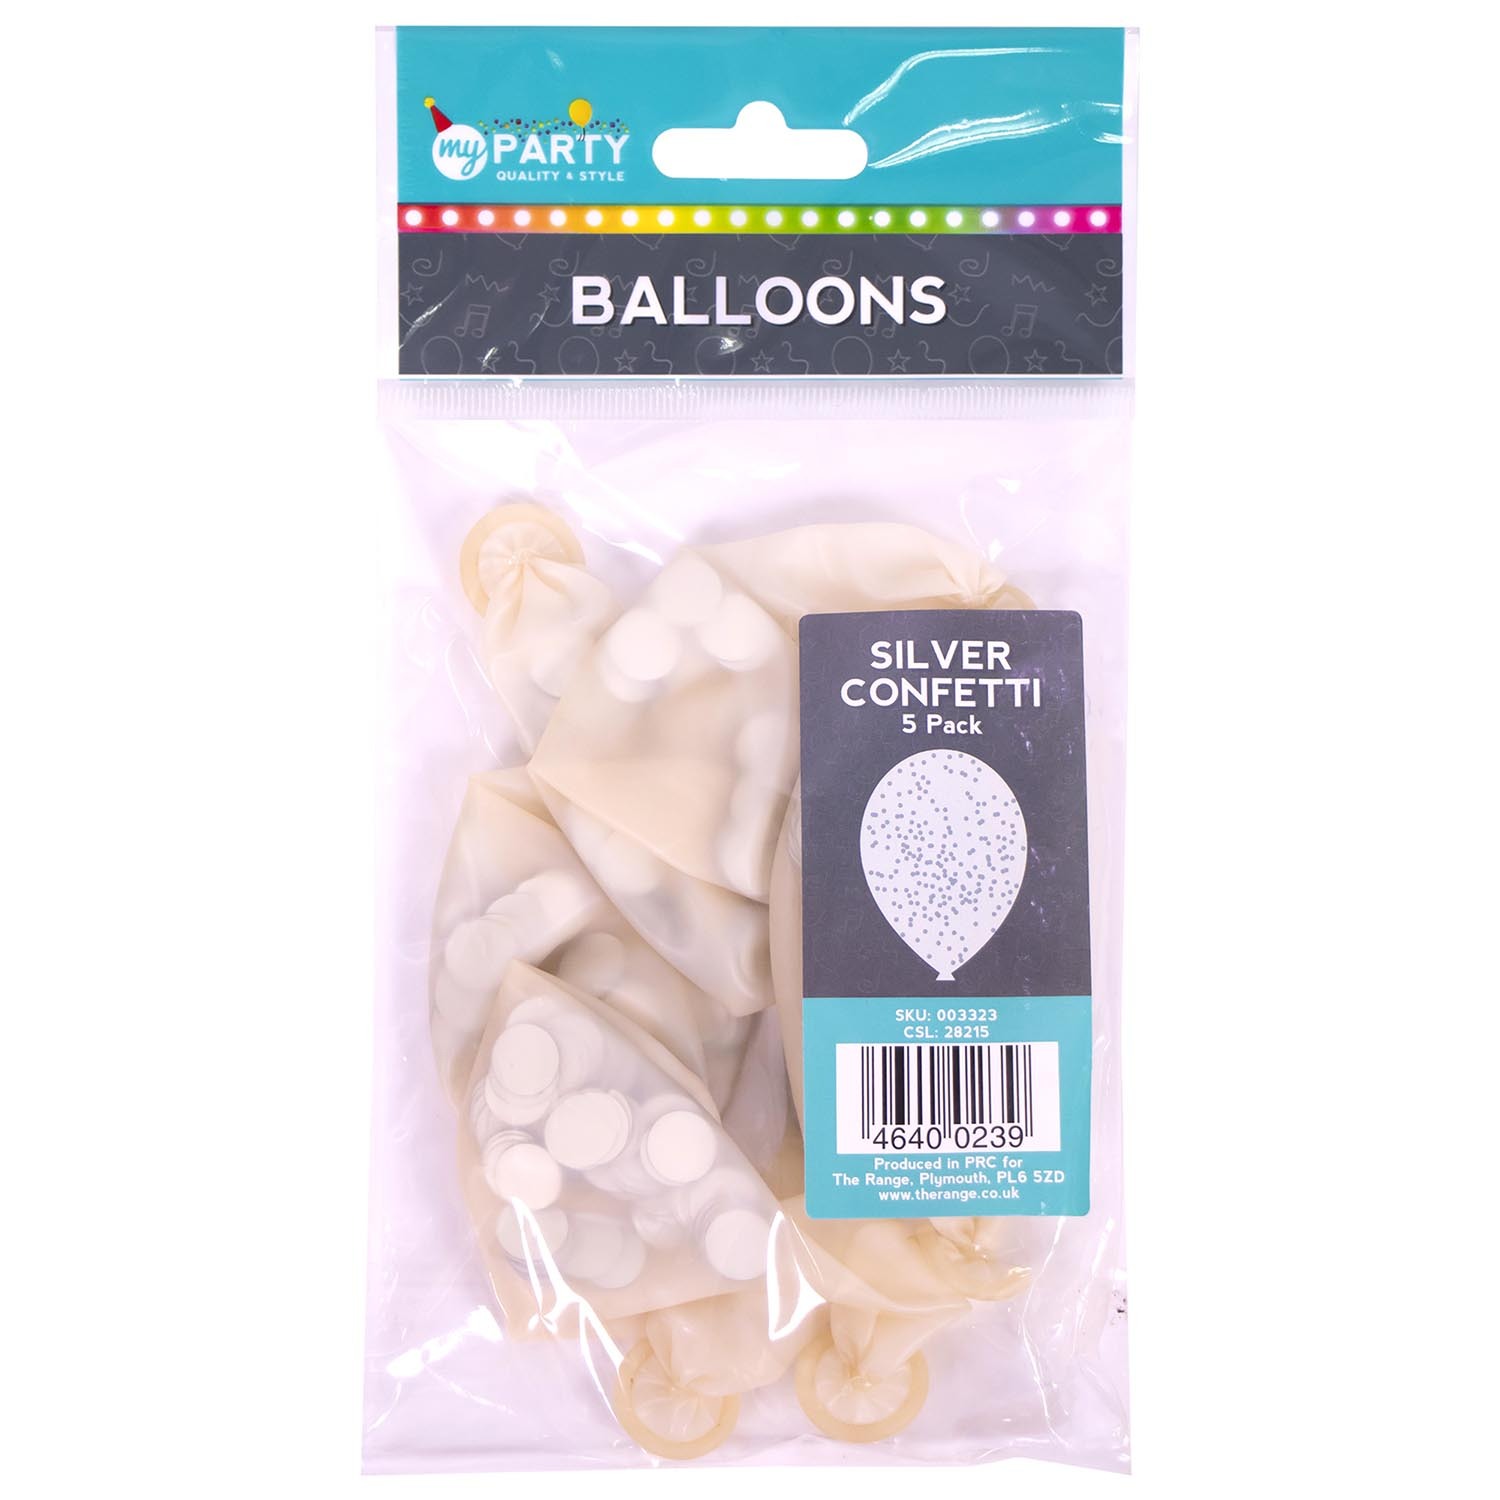 Pack of Five Confetti Filled Balloons - Silver Image